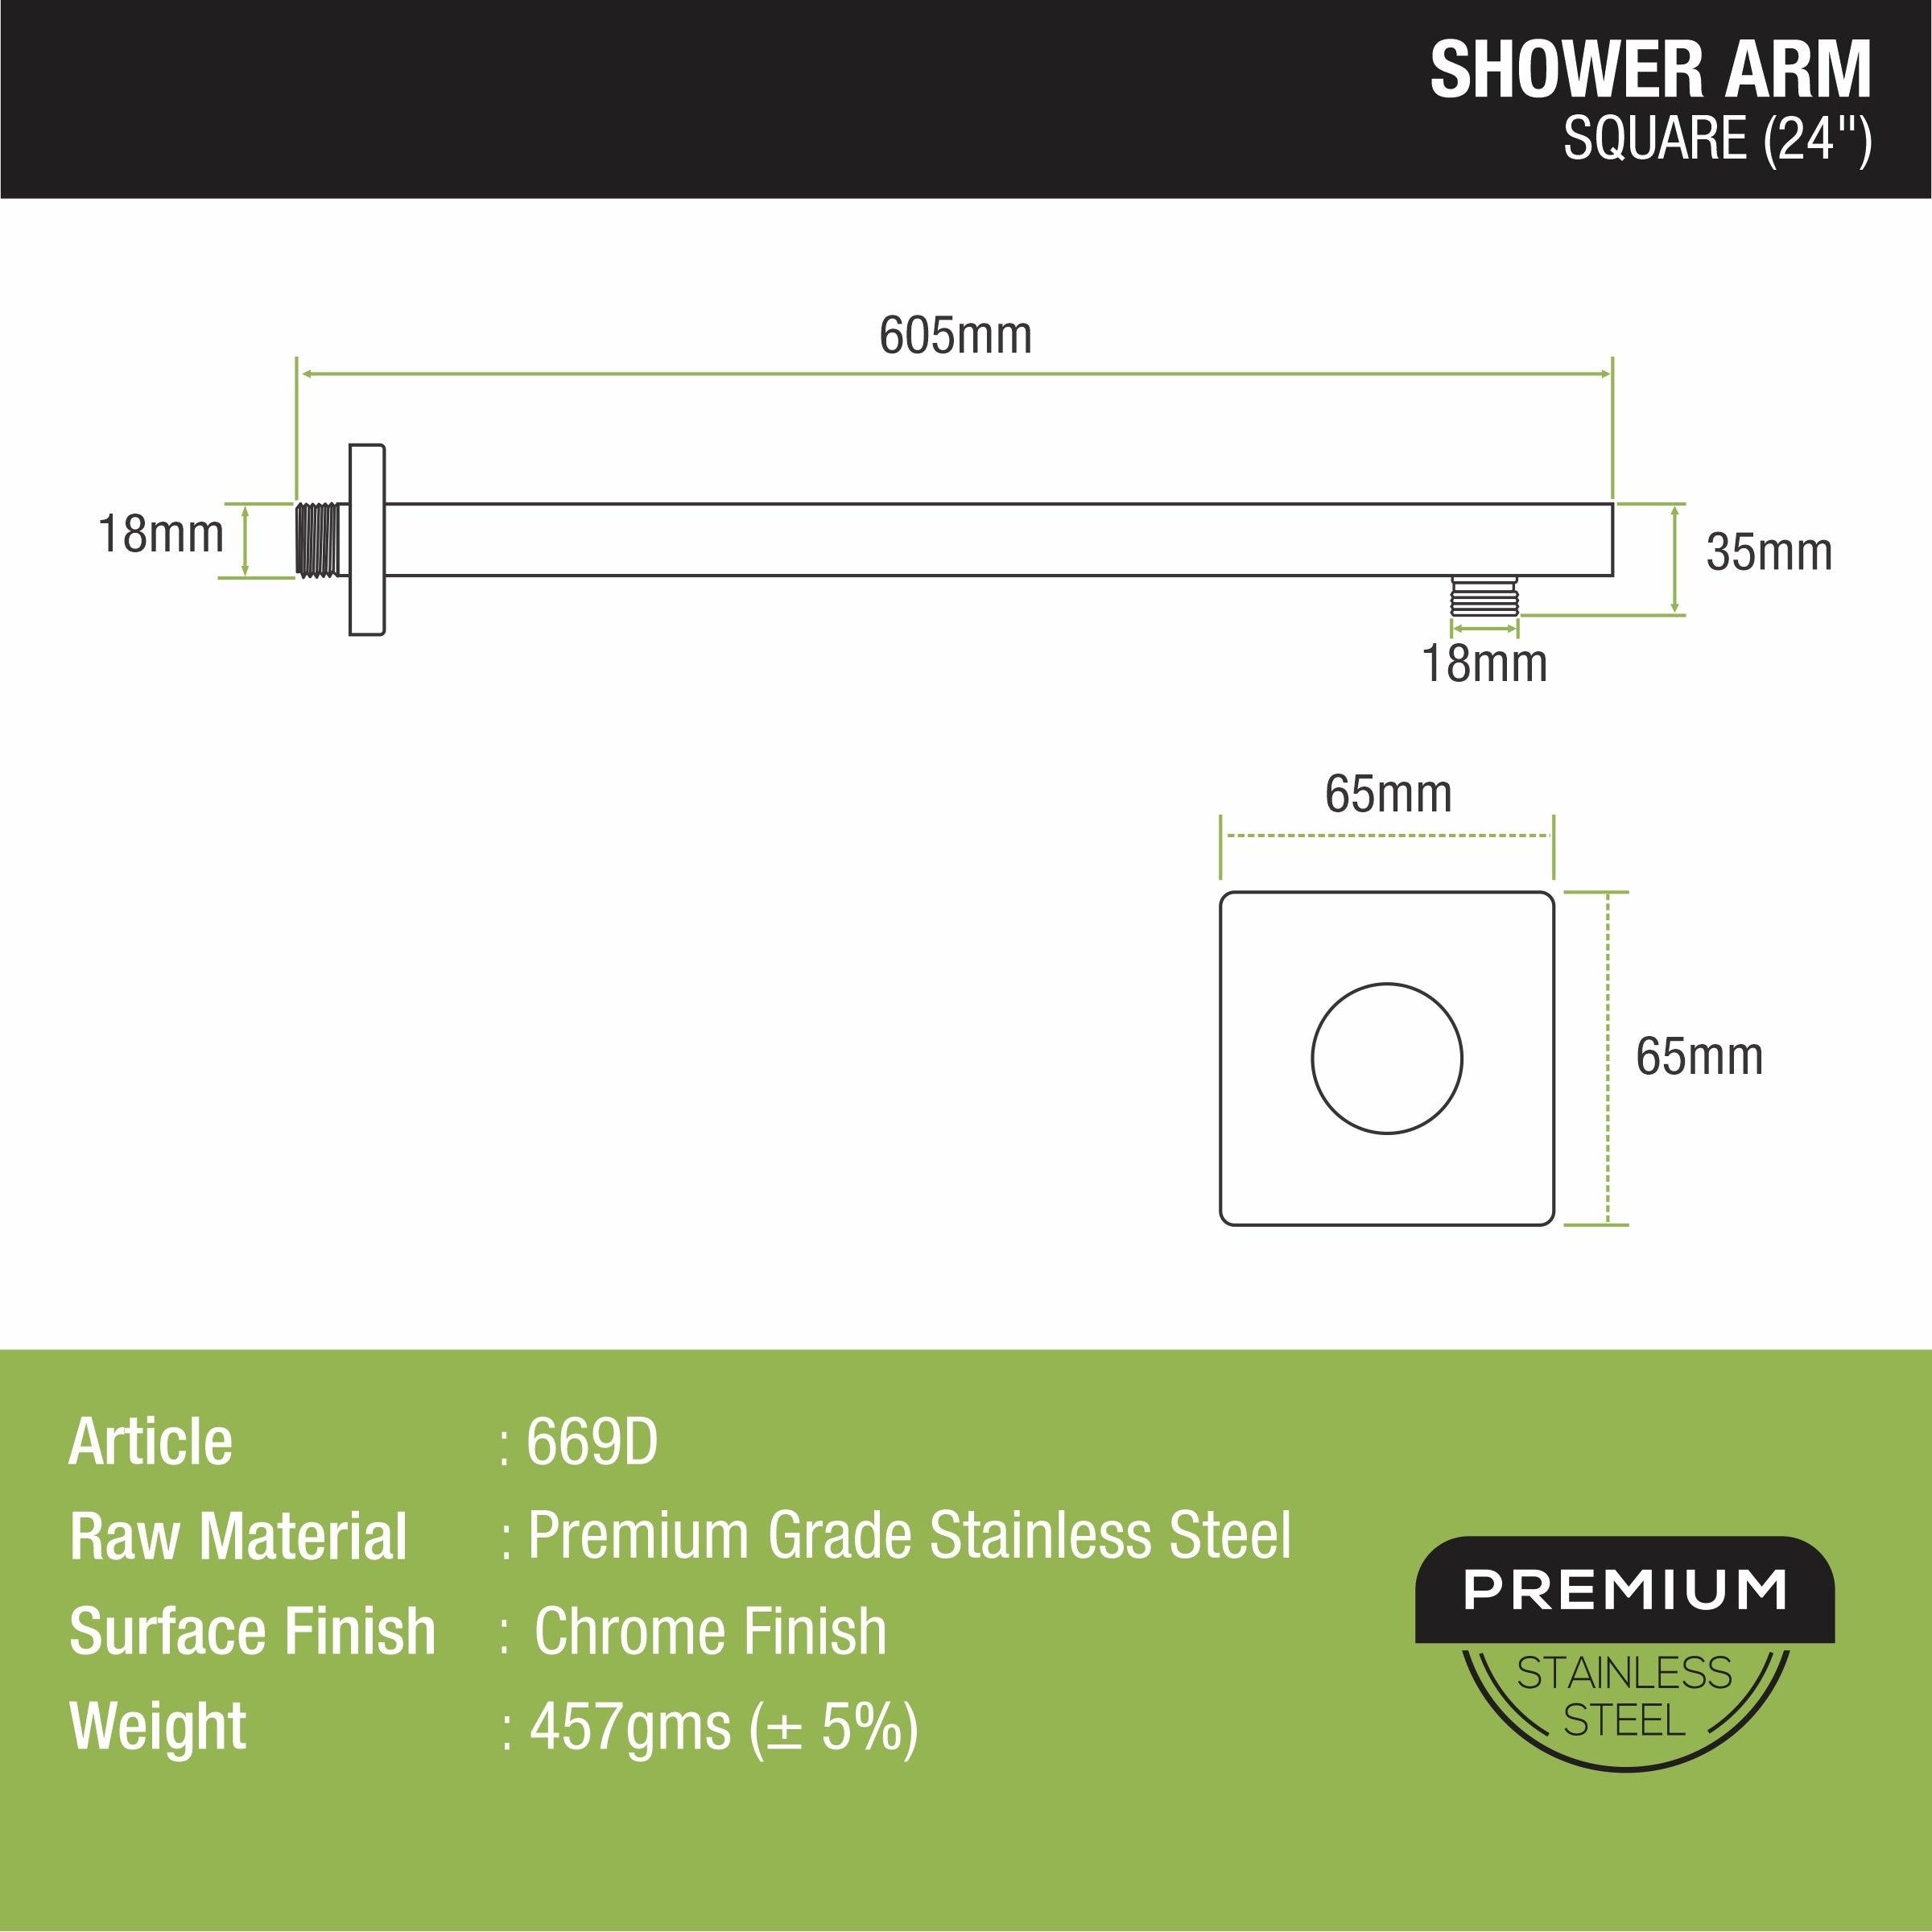 Square Shower Arm (24 Inches) sizes and dimensions